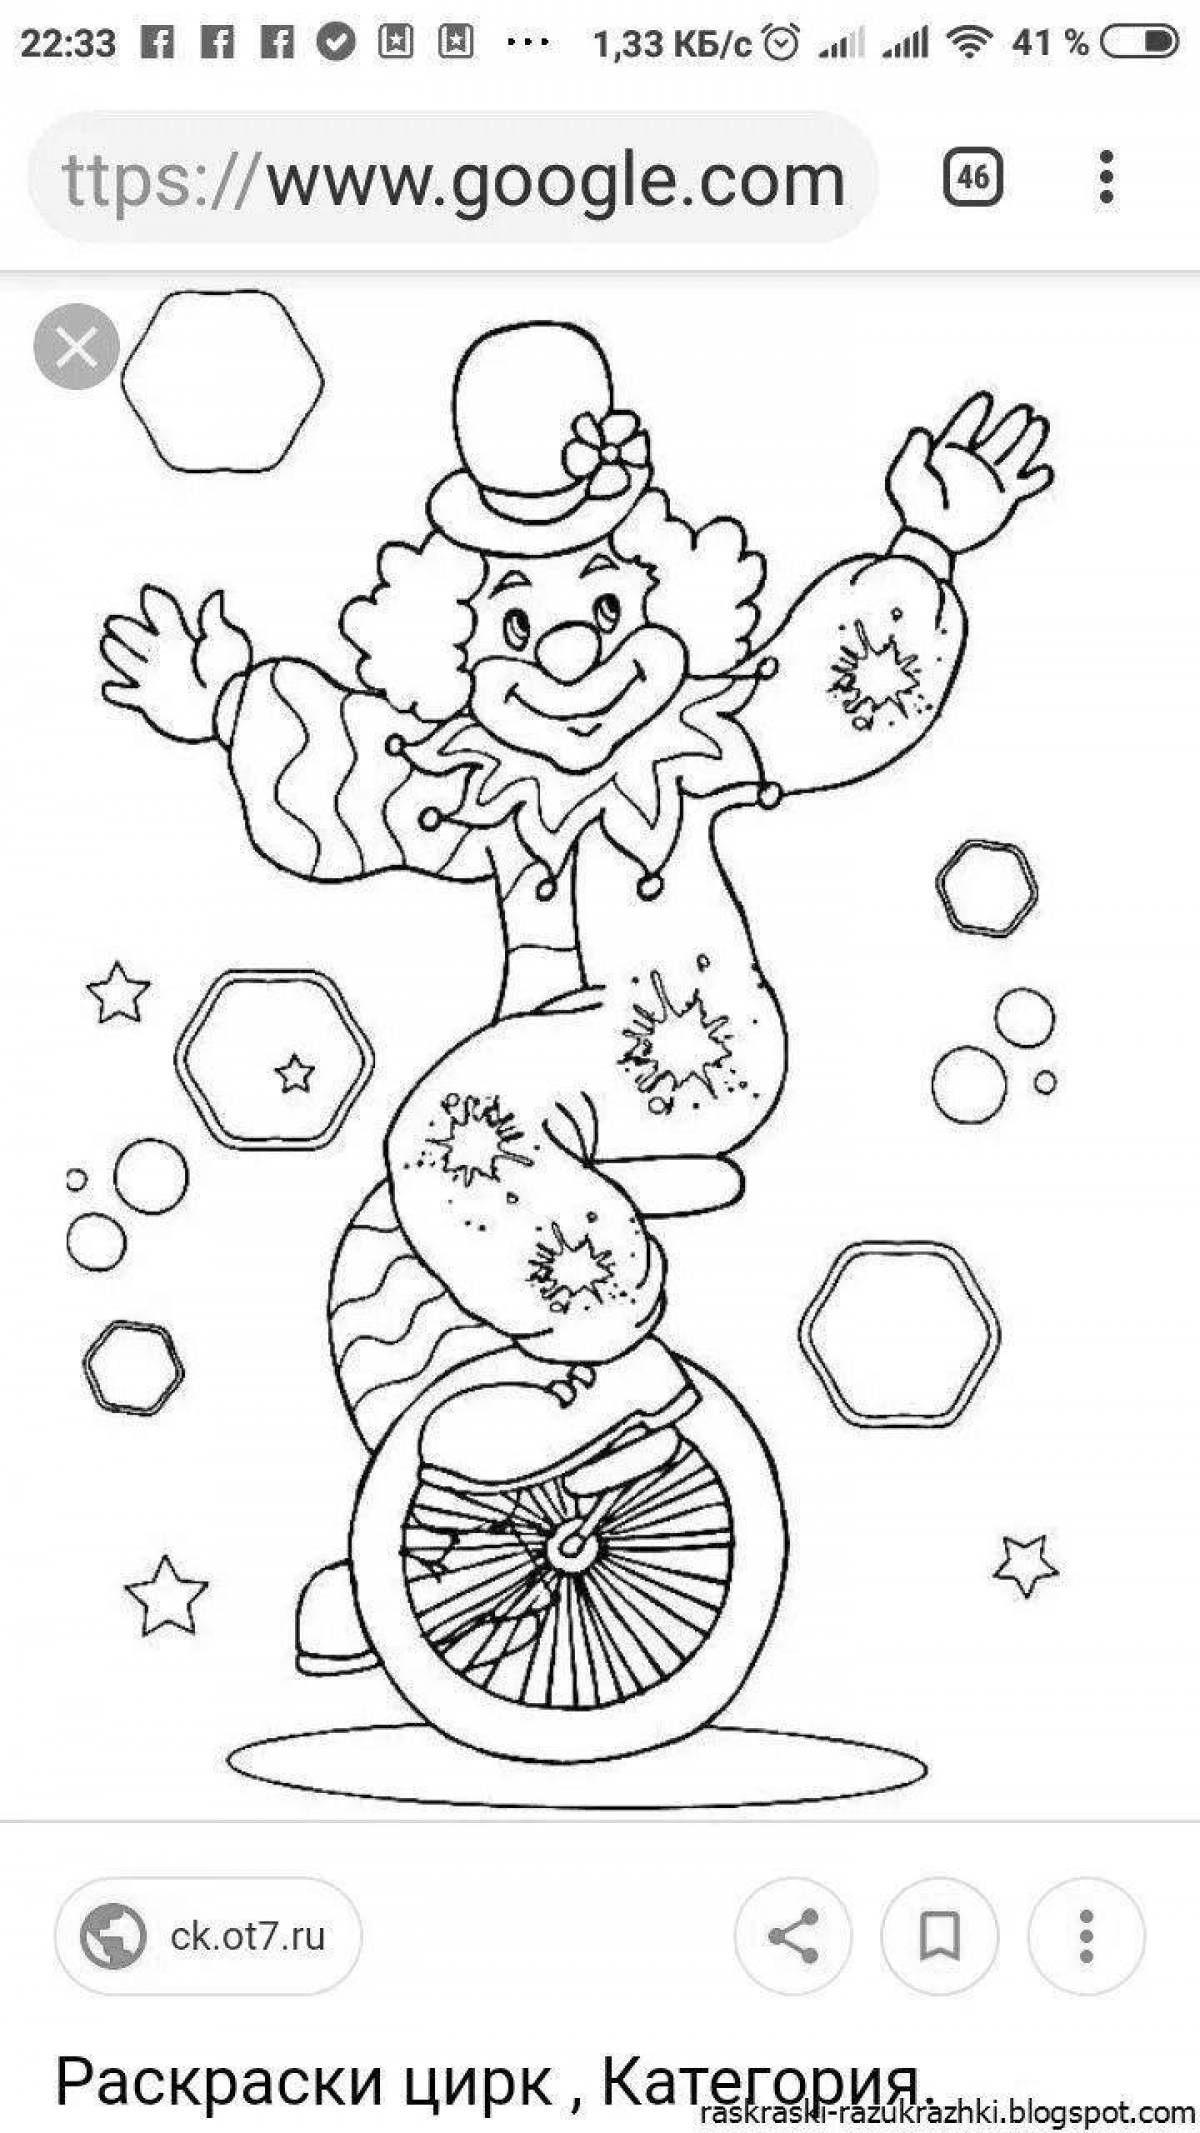 Exuberant clown drawing for kids